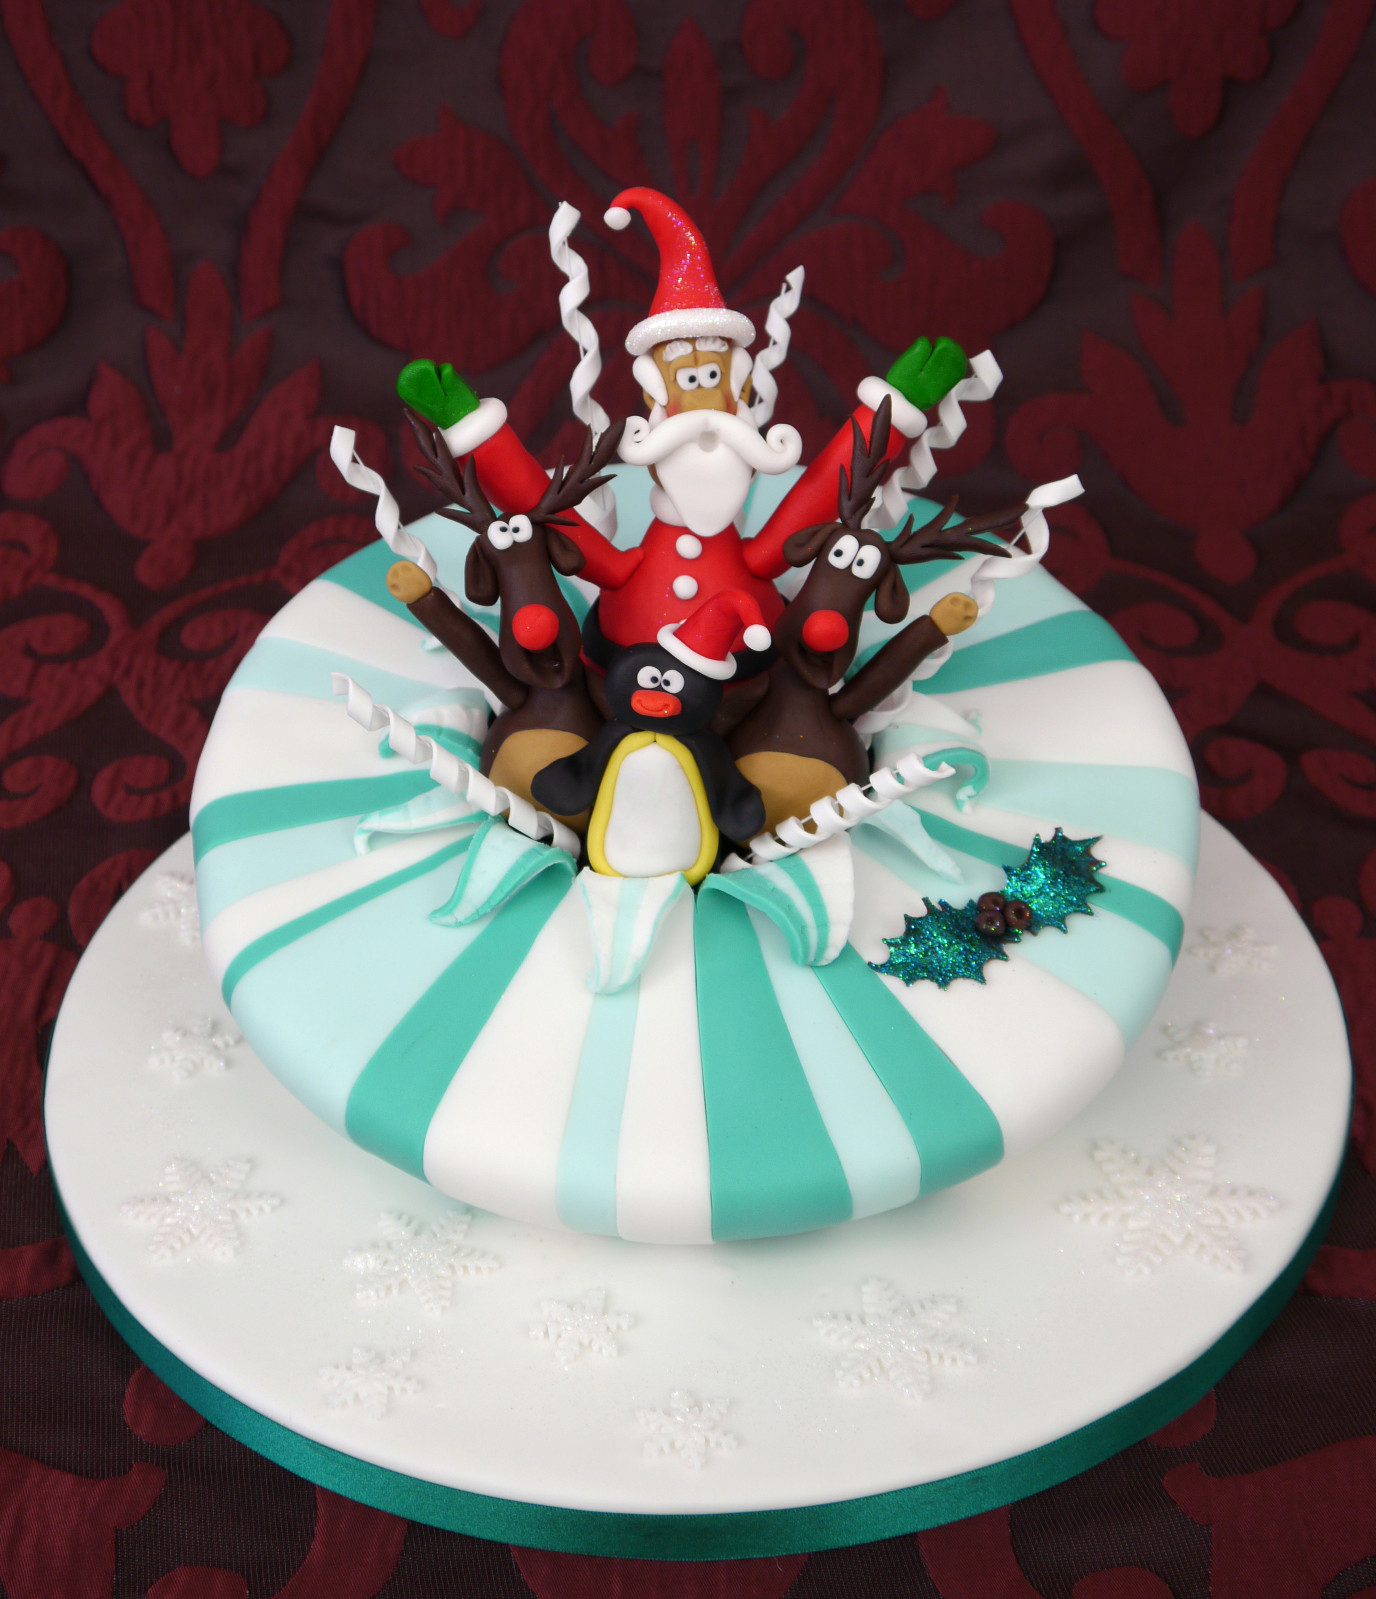 Best Christmas Cakes
 20 Delicious Christmas Cakes ideas 2018 Best Holiday Cake